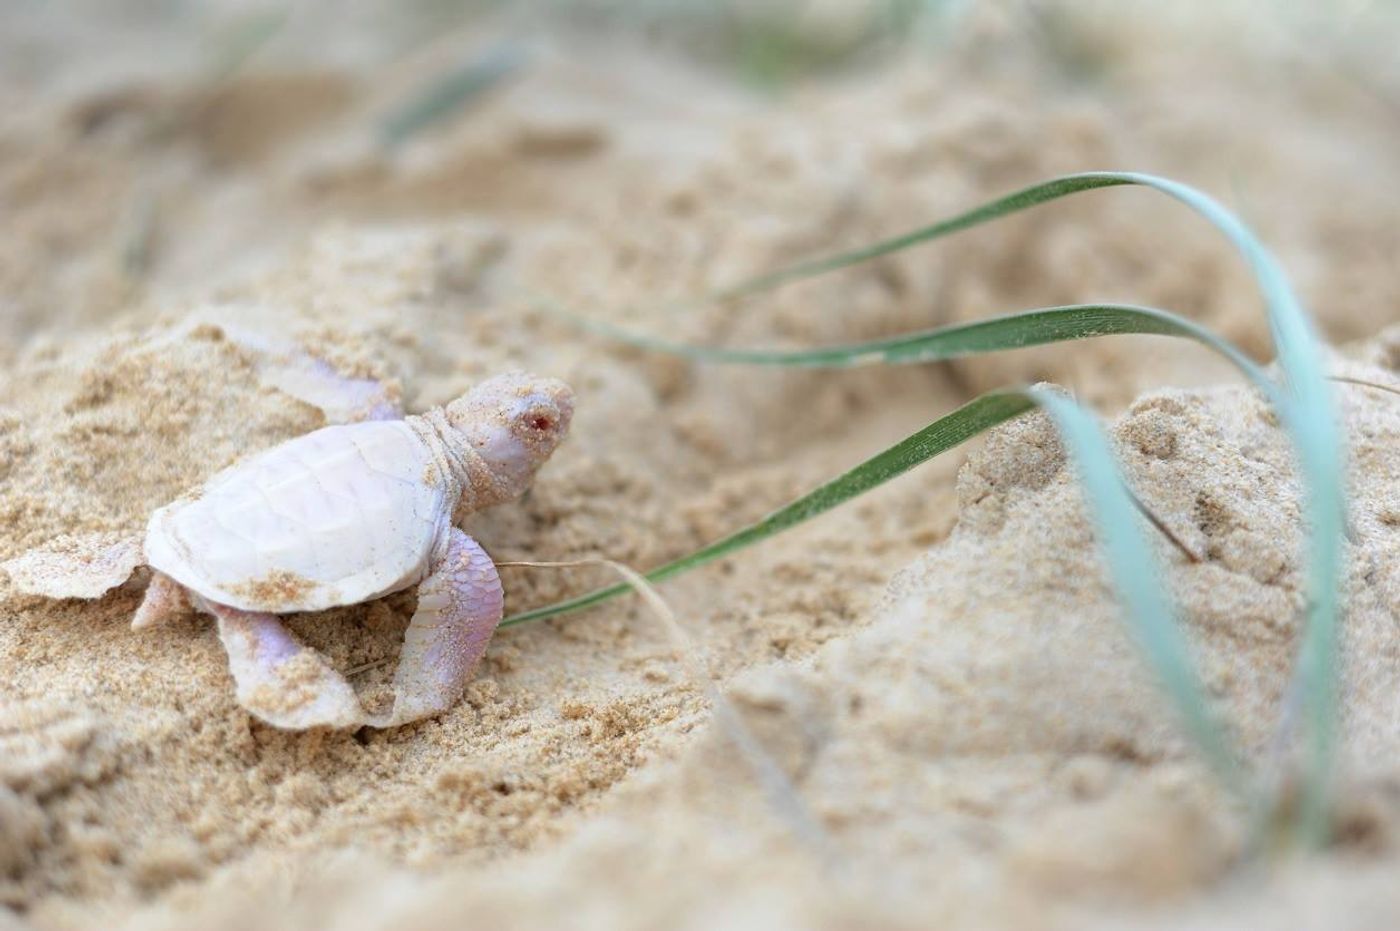 This rare albino green turtle was discovered on an Australian beach.